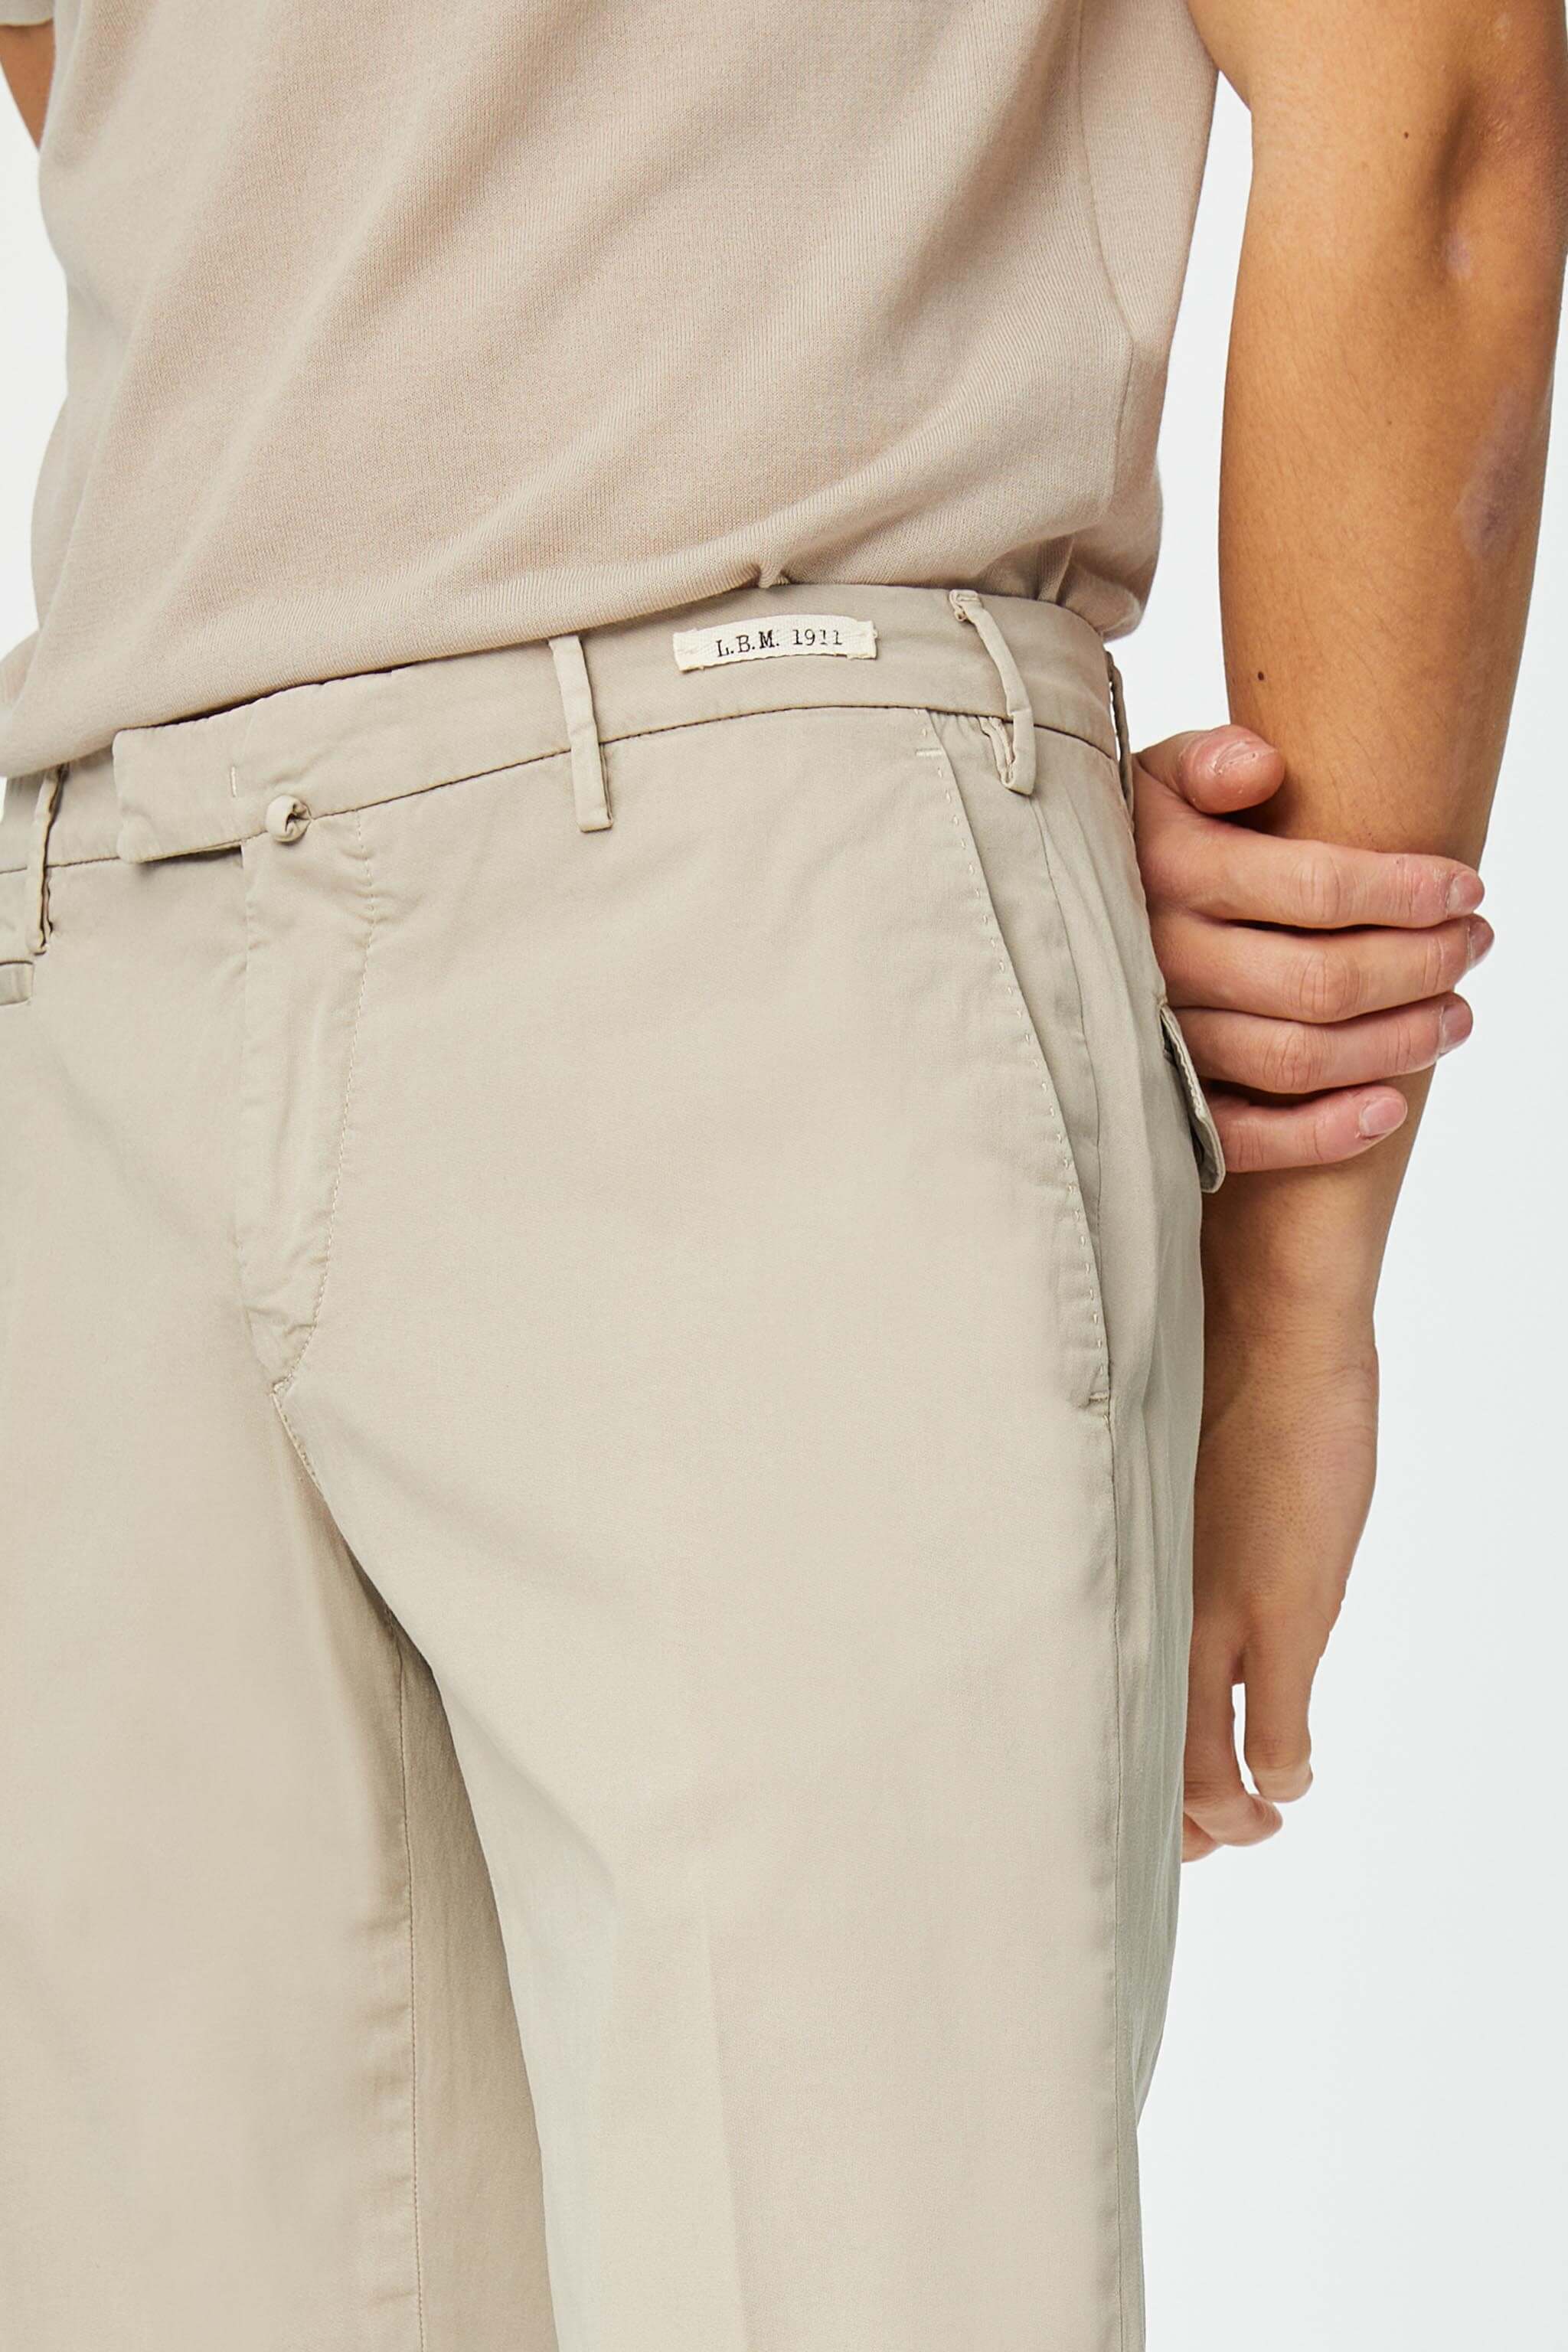 Garment-dyed ROD pants in dove gray